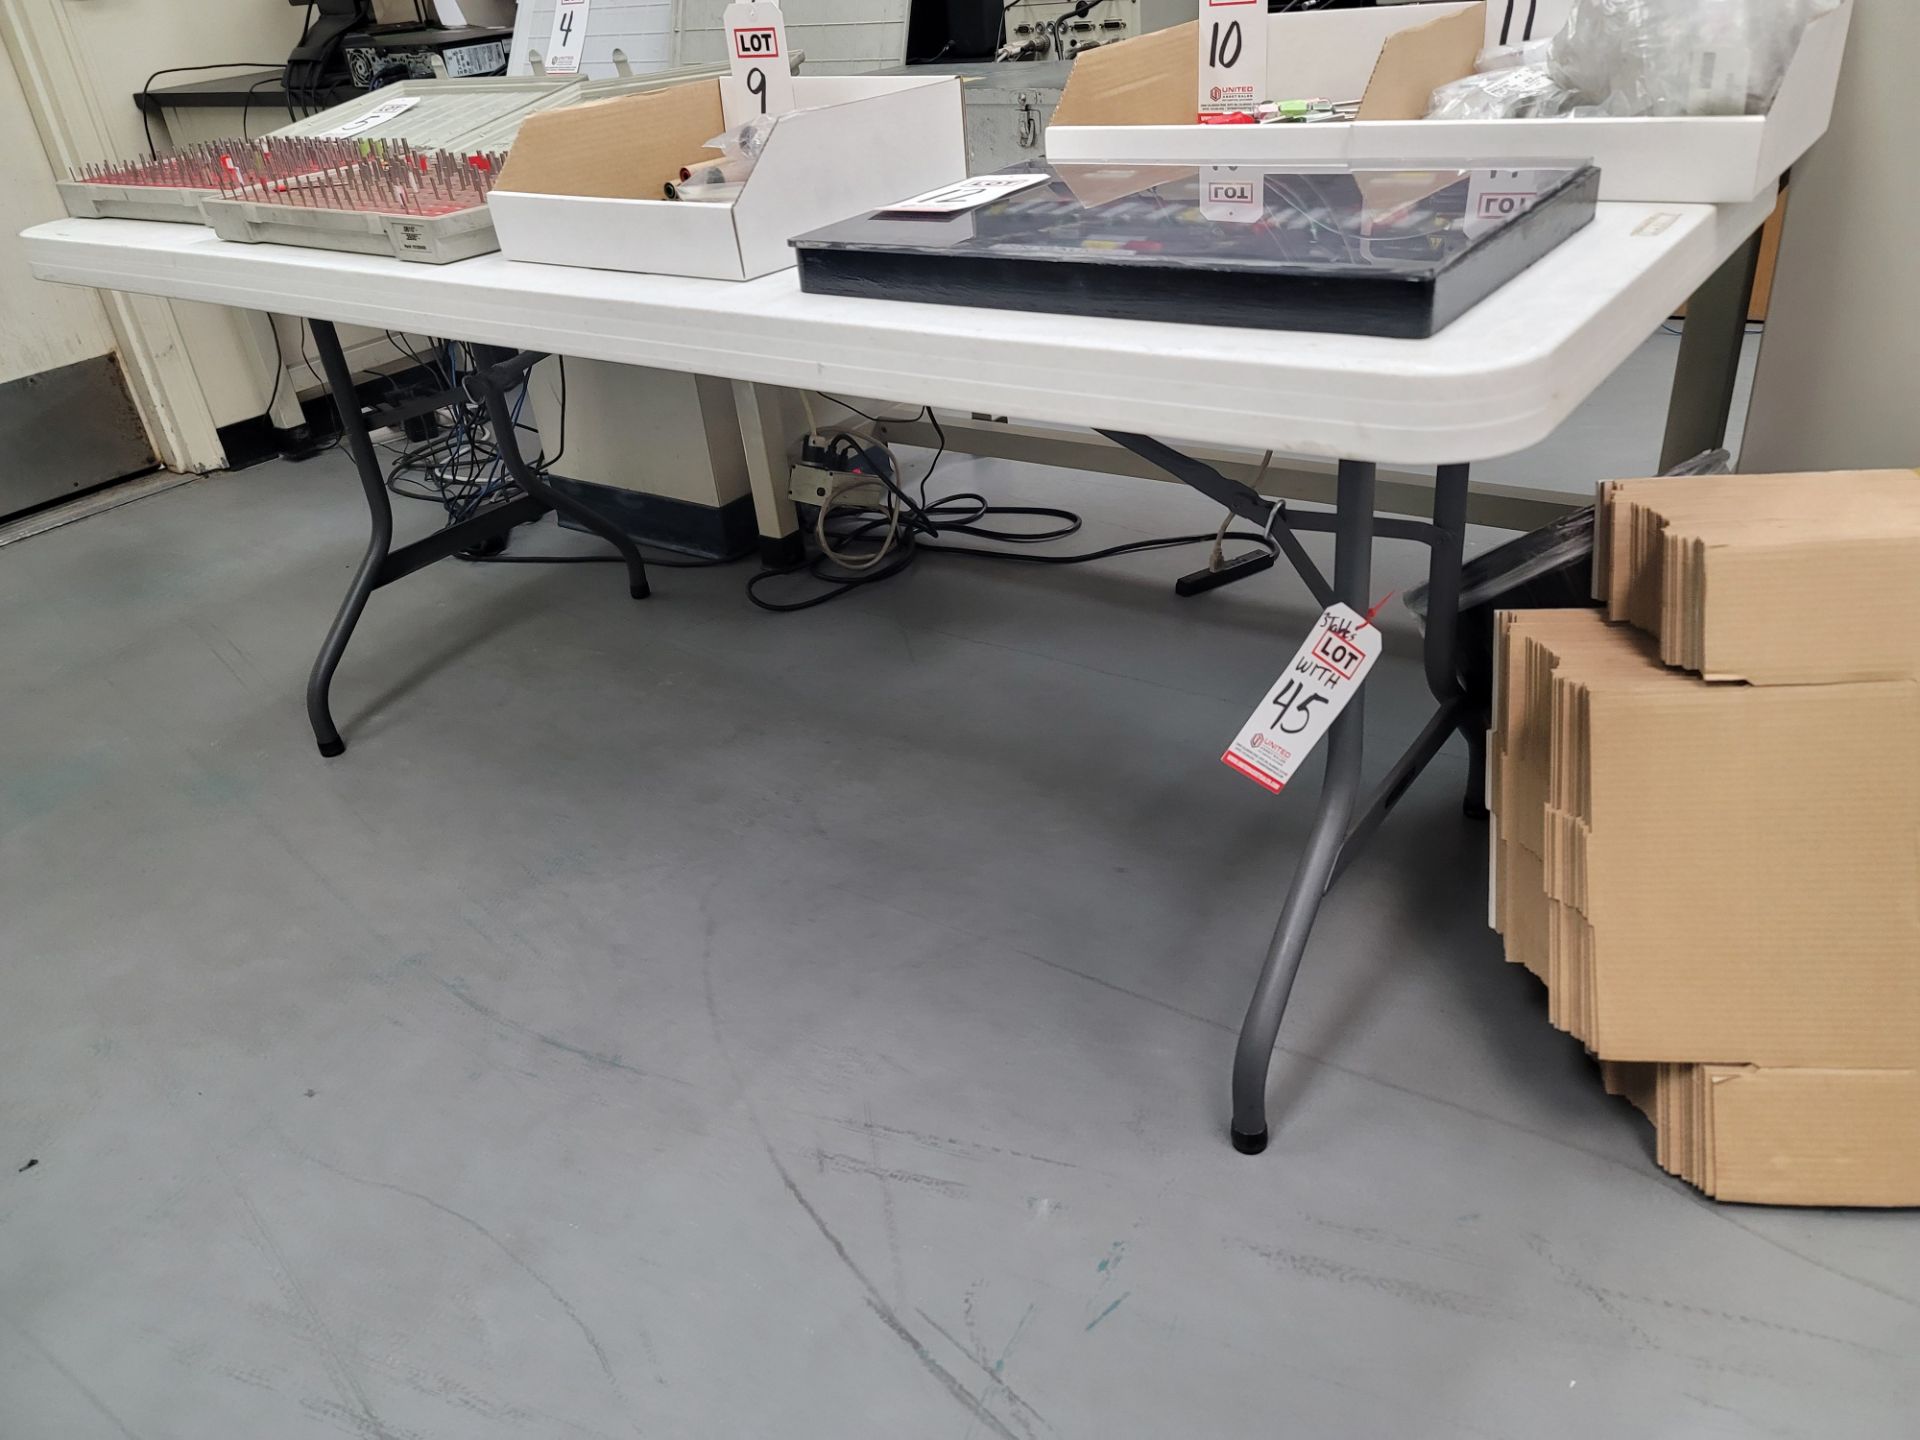 LOT - (3) FOLDING TABLES, 6' X 30", CONTENTS NOT INCLUDED, (DELAYED PICKUP UNTIL MARCH 1), (BUILDING - Image 3 of 3